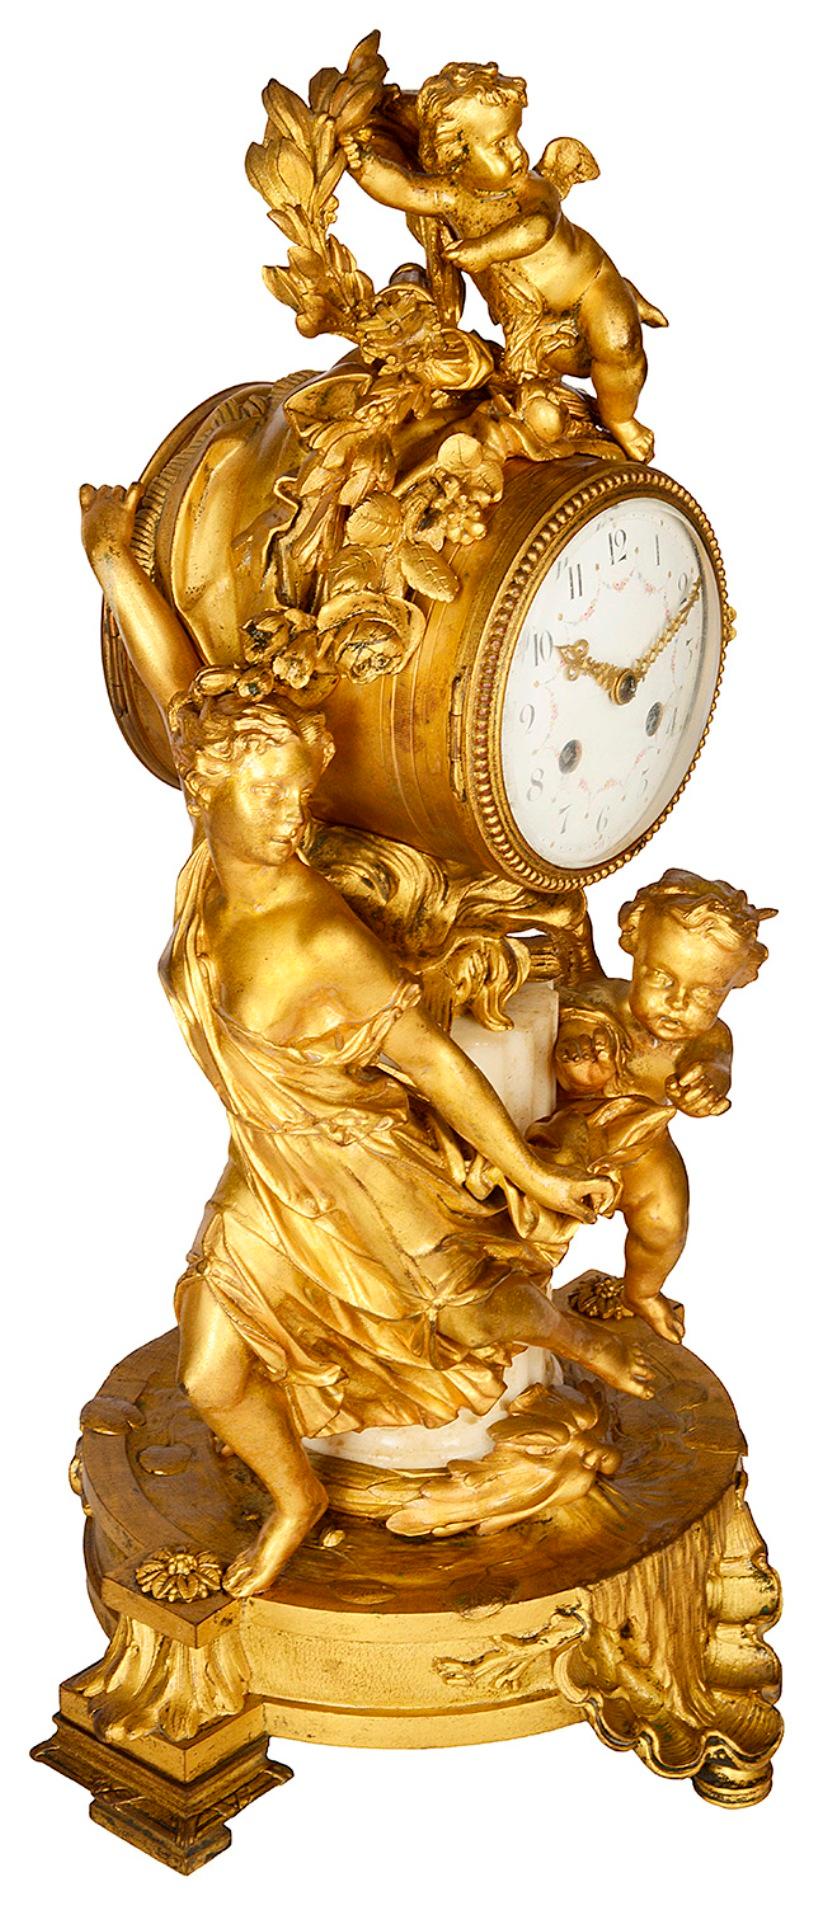 An enchanting late 19th century French gilded ormolu and marble mantel clock, depicting cherubs playing, one chasing a young girl, the other hiding amongst a wreath and foliage. The enamel clock face with an eight day duration, strikes on the hour